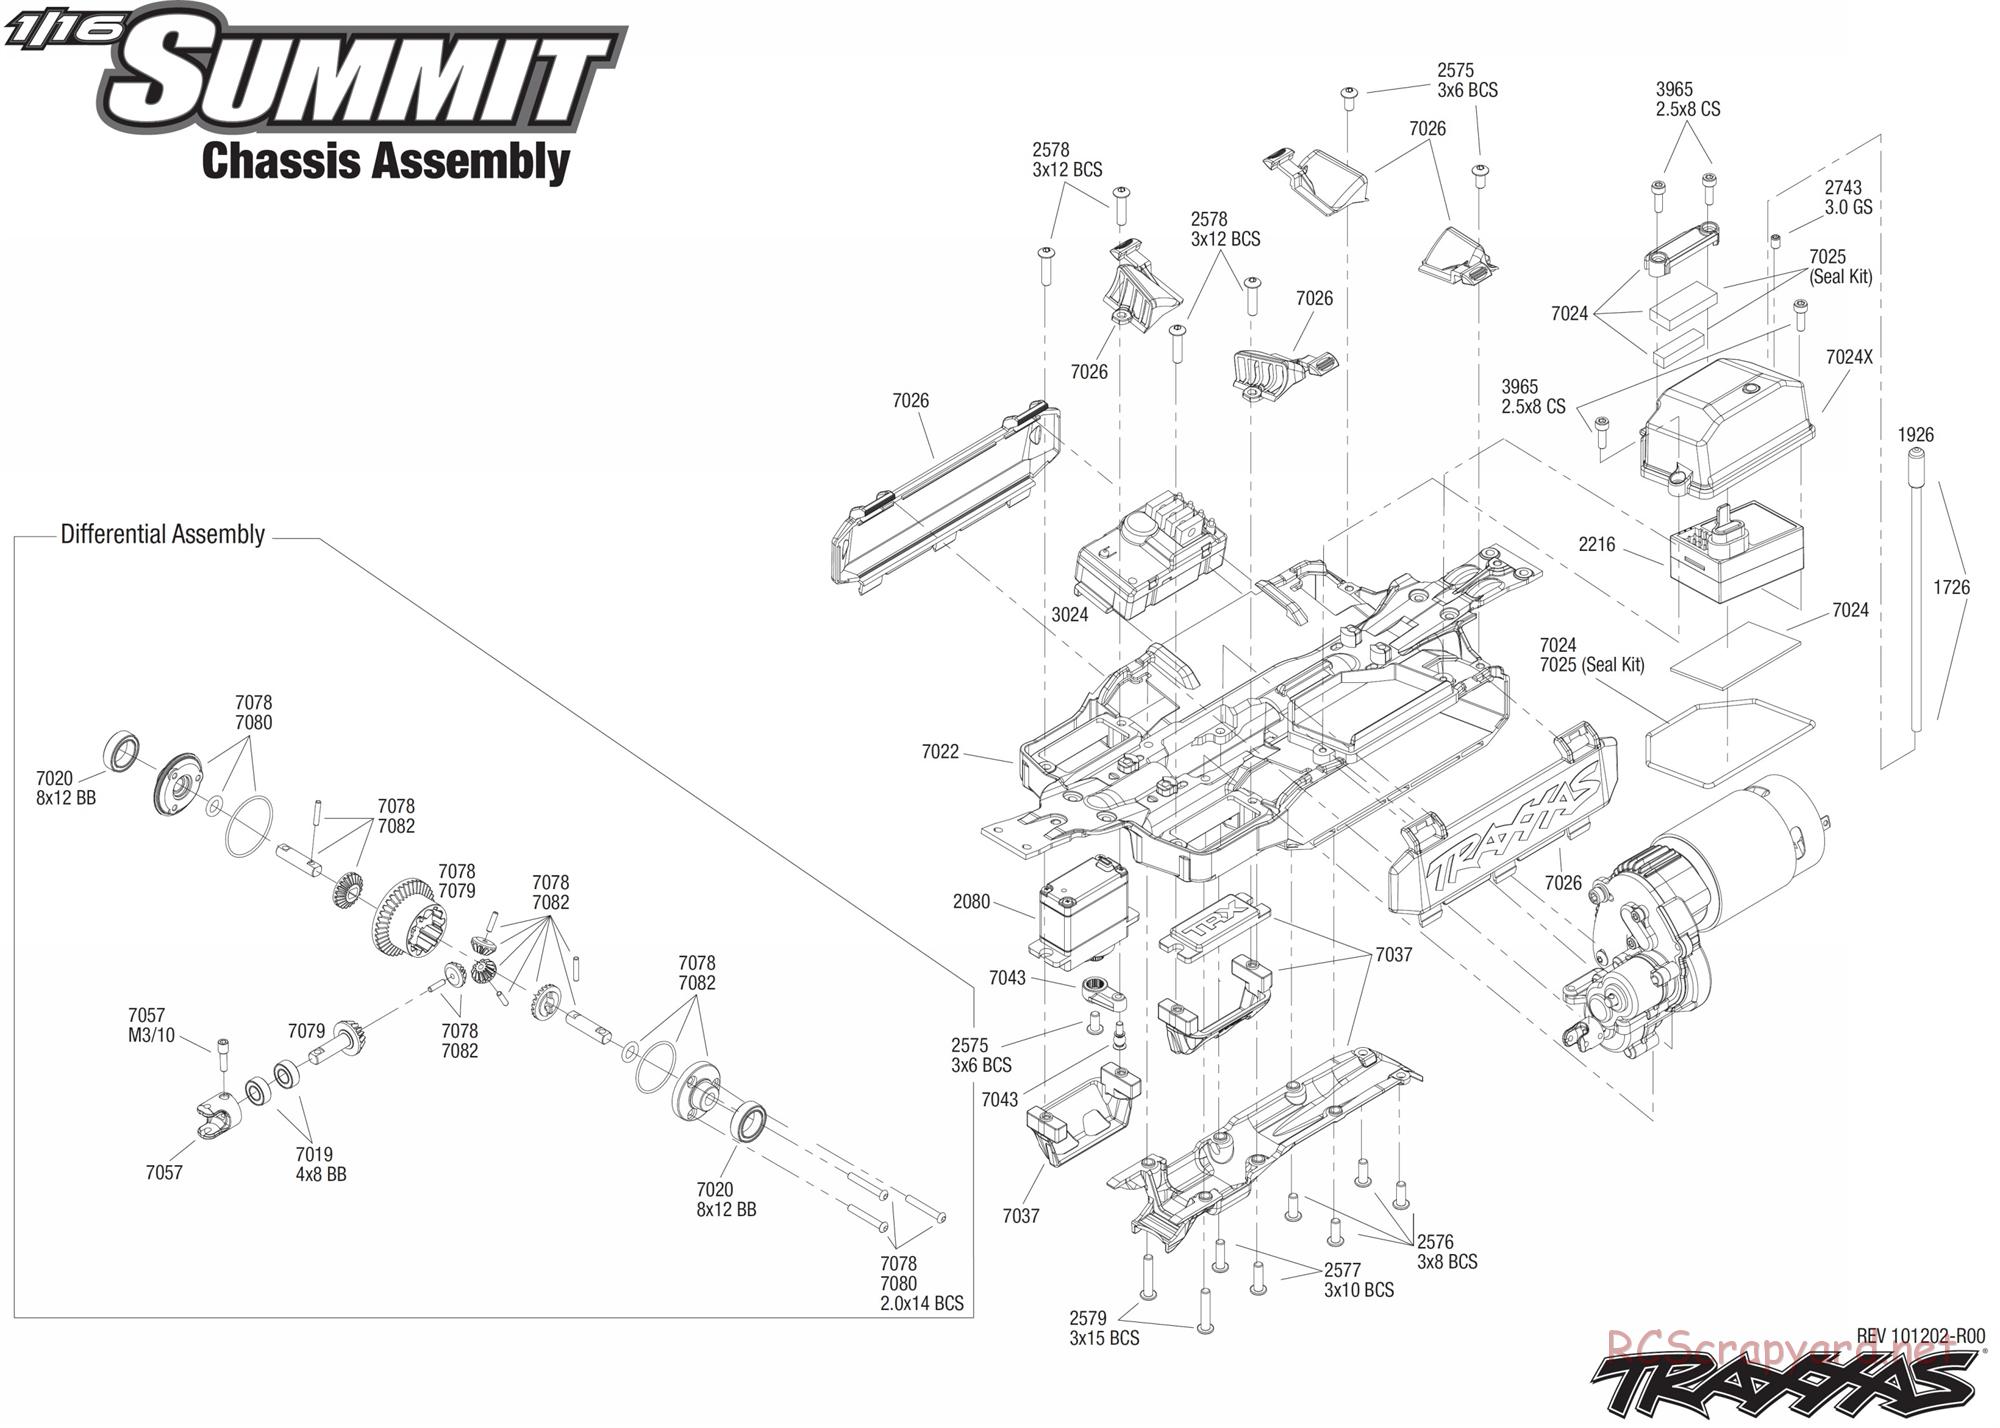 Traxxas - 1/16 Summit (2011) - Exploded Views - Page 1